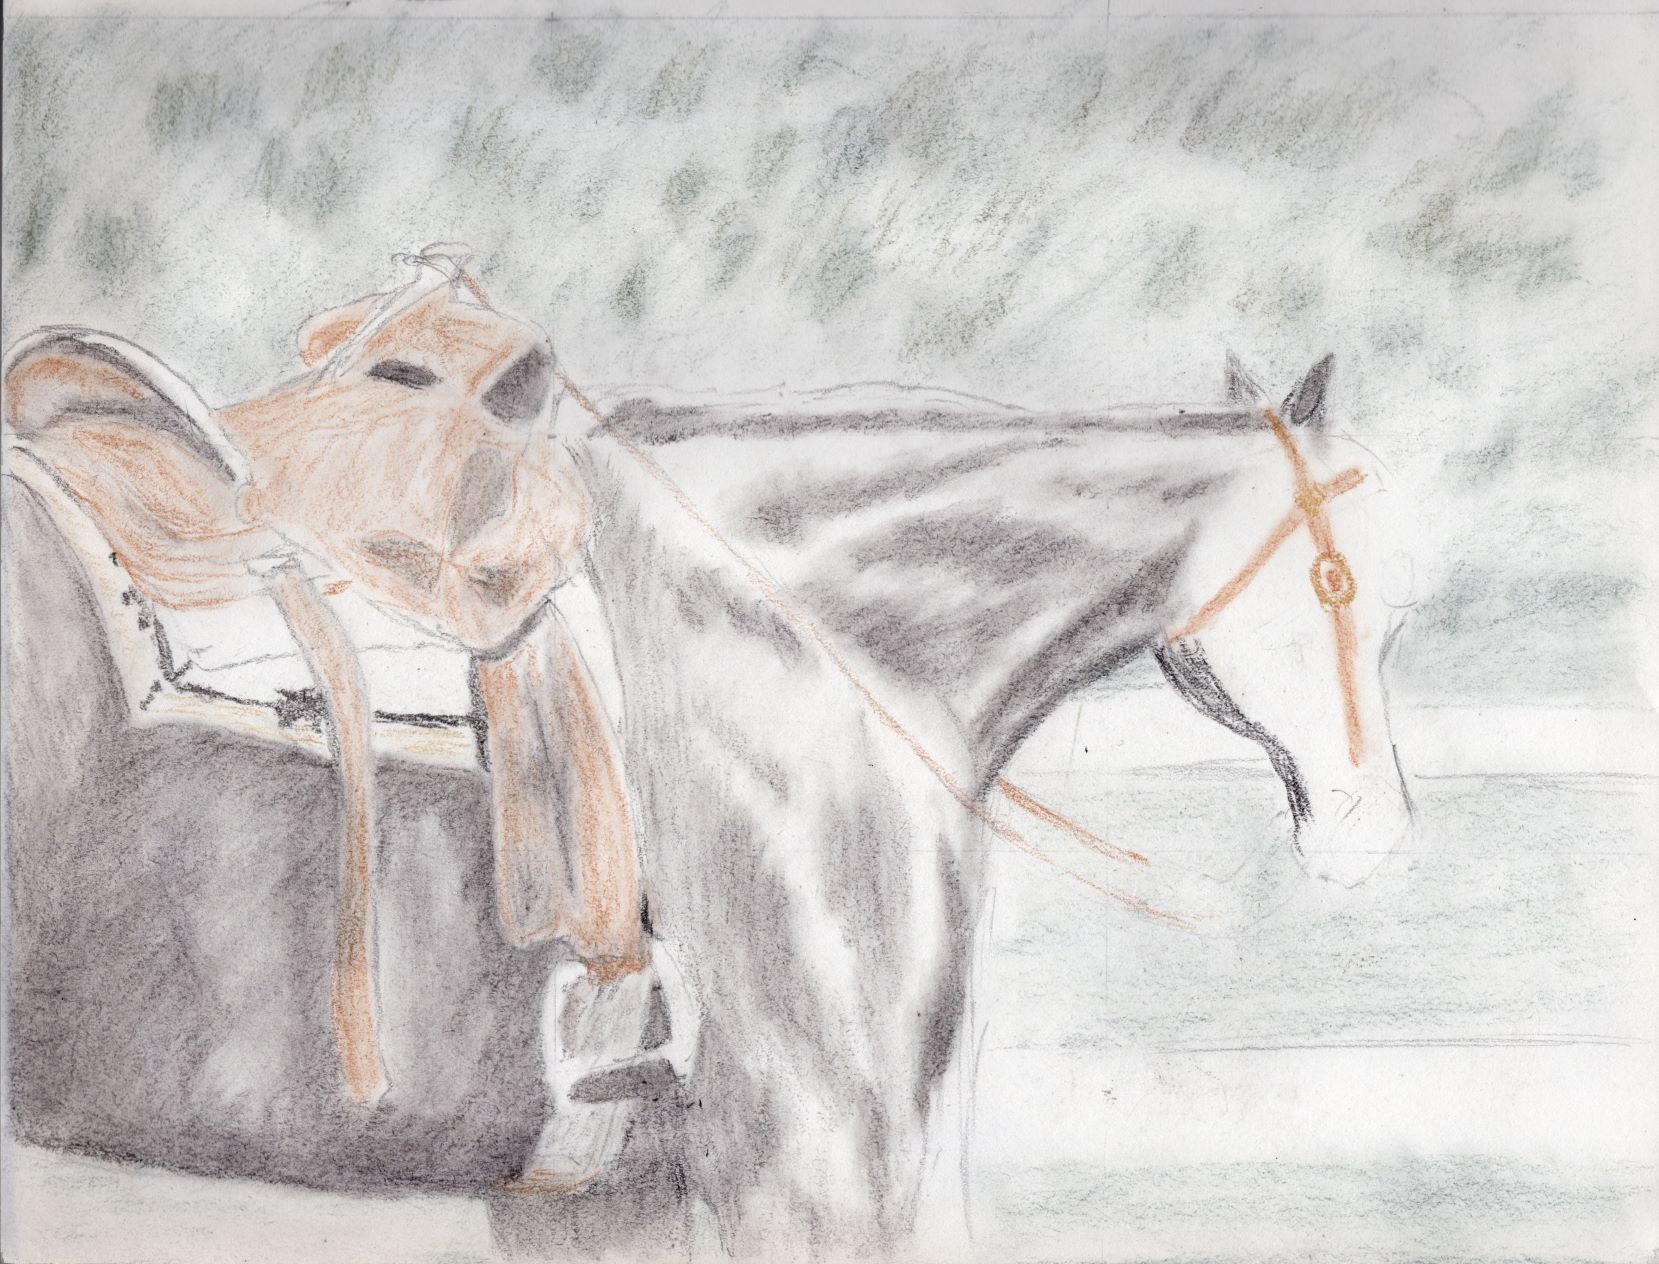 first drawing using my new tinted charcoal - a horse saddled up and waiting for the rider